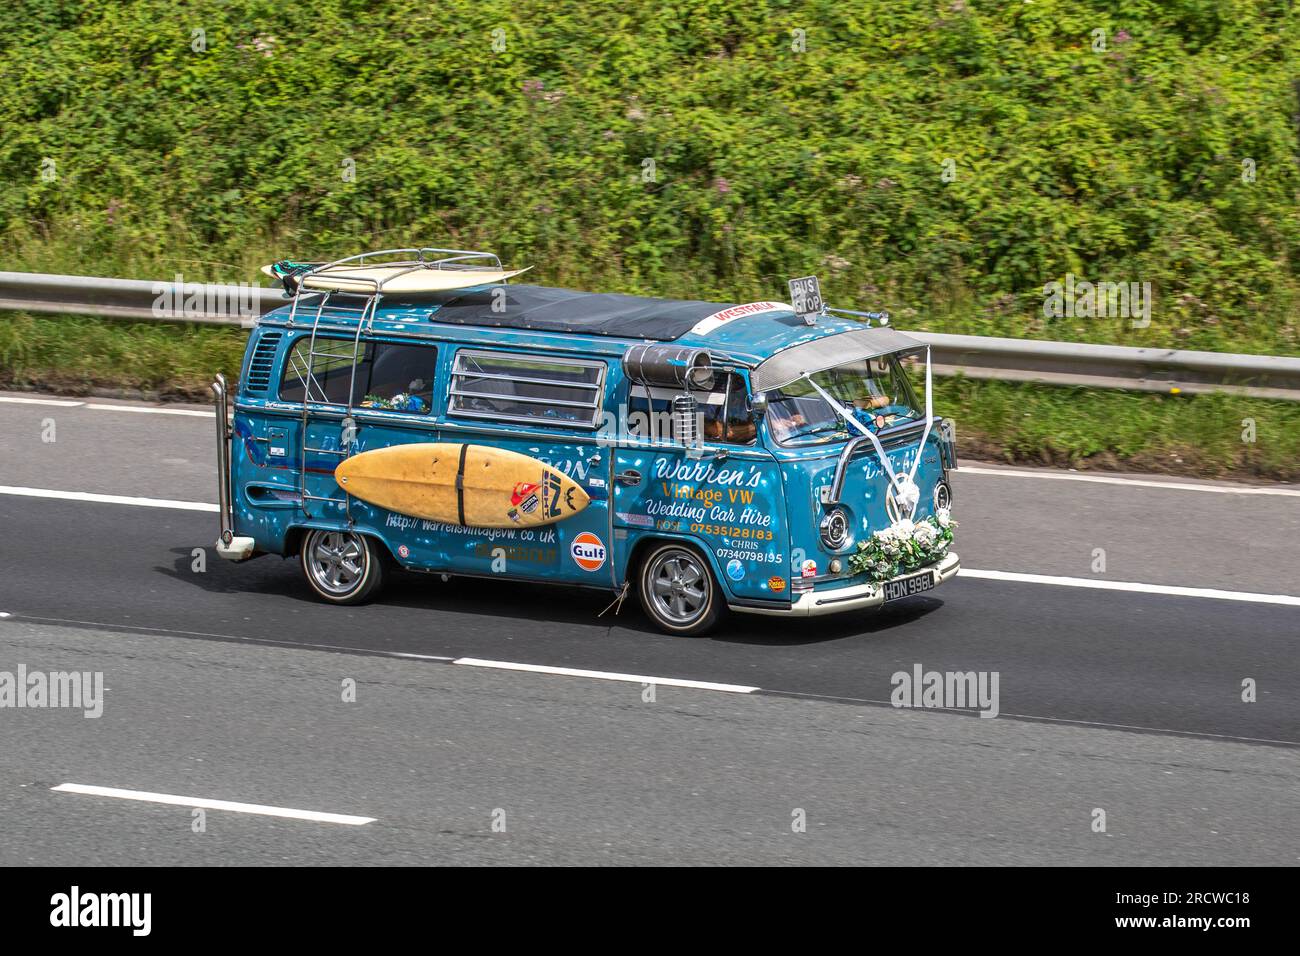 Warren's Vintage VW. 1973 70s seventies Blue Custom VW Volkswagen Motor Caravan LCV Petrol 1584 cc. A curious wedding hire car with hippie decorations, white ribbons & surfboard; travelling at speed on the M6 motorway in Greater Manchester, UK Stock Photo